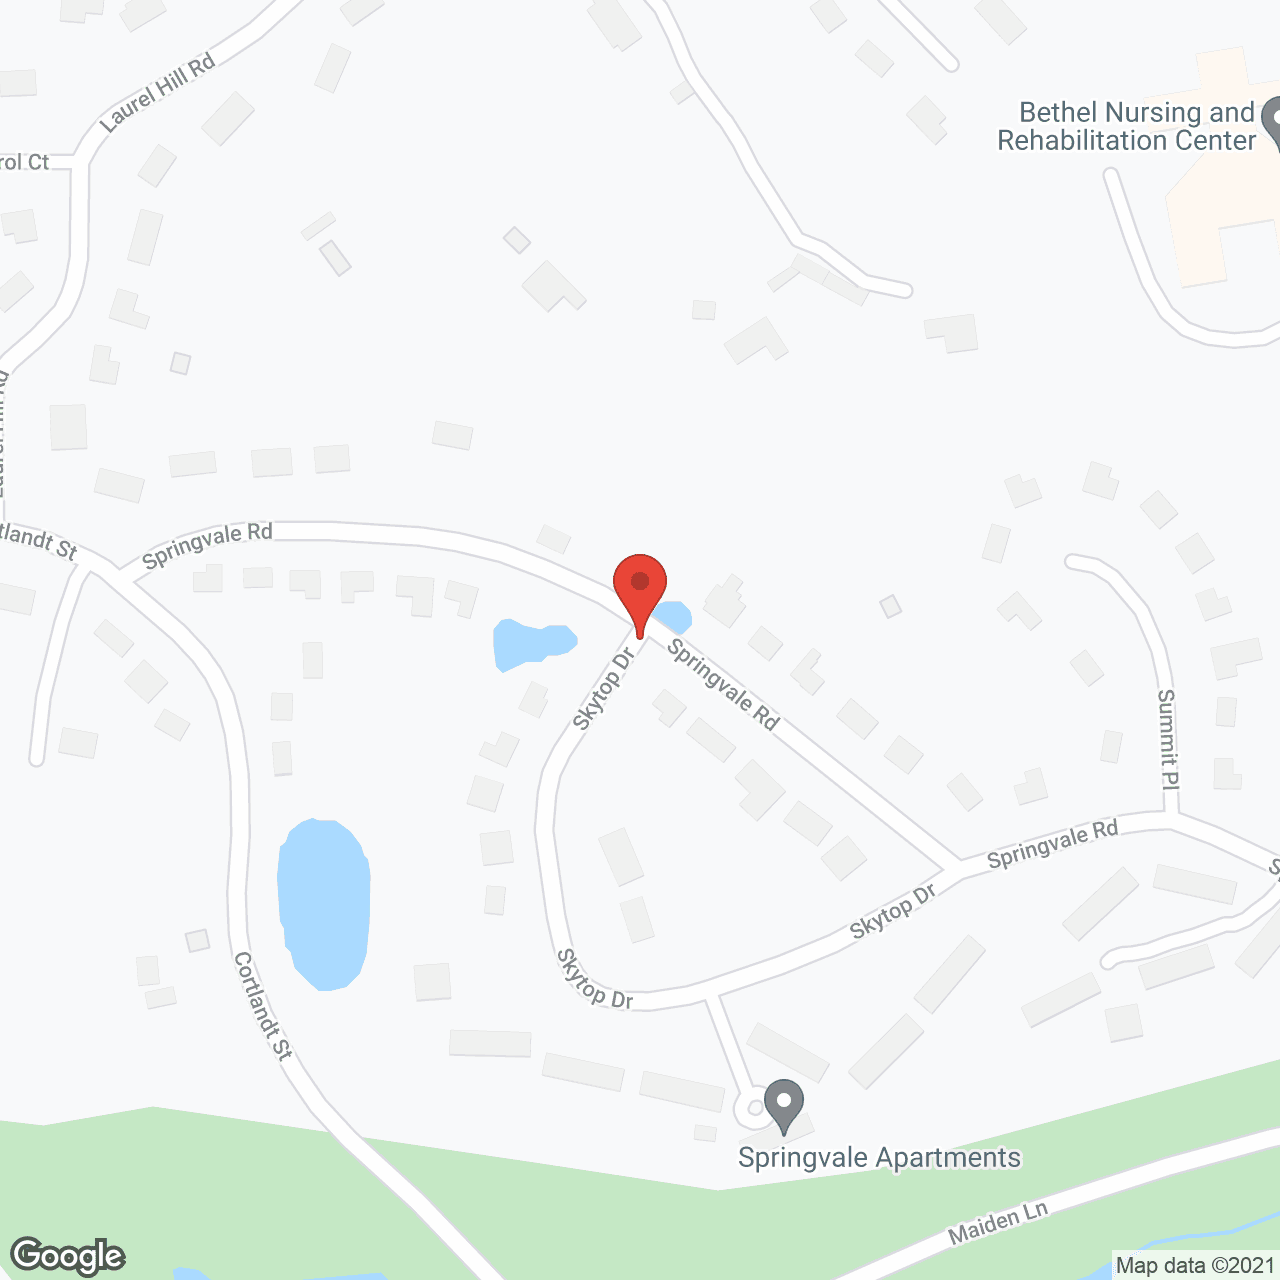 Springvale Apartments in google map